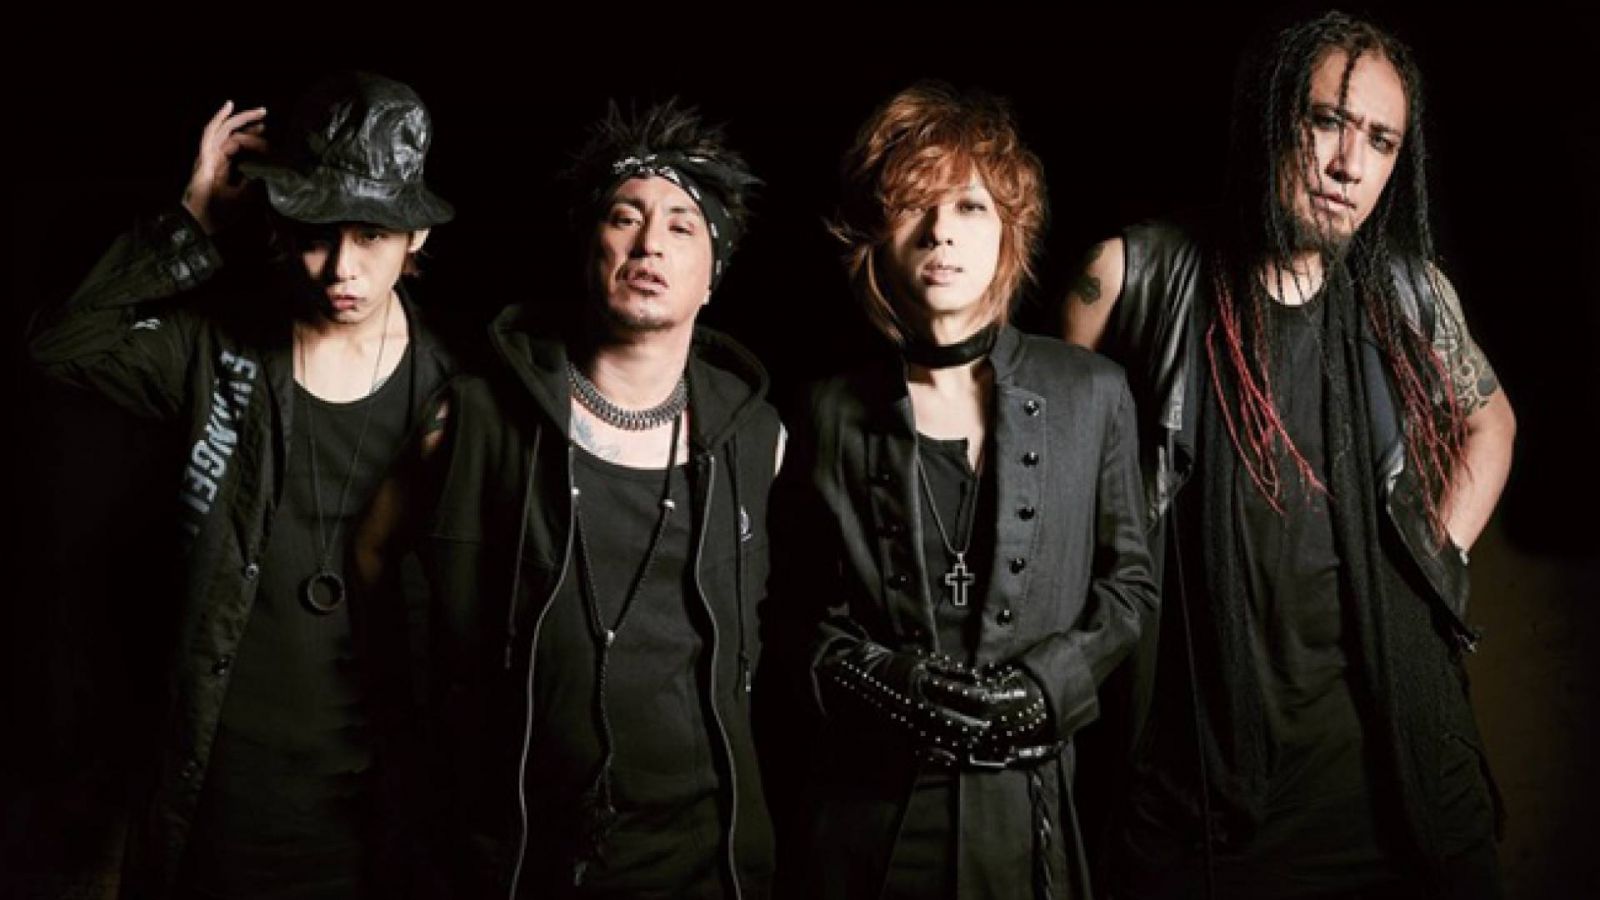 sads to Release "Ultimate Edition" of Final Album Before Hiatus © sads. All rights reserved.